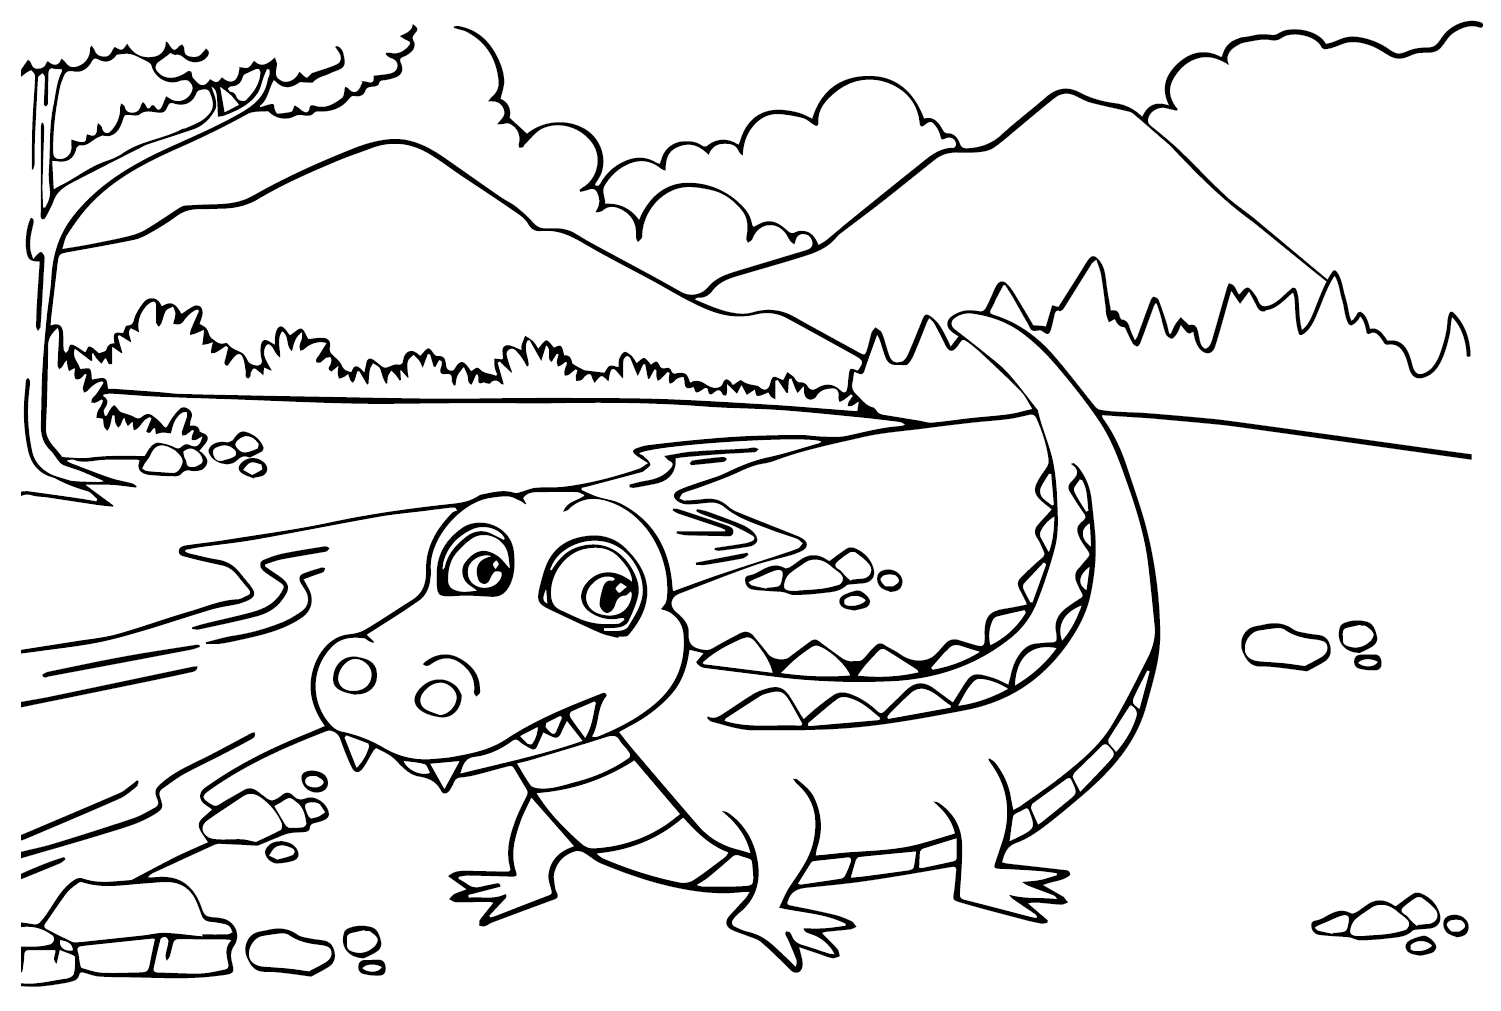 Coloring Page of Crocodile from Crocodile